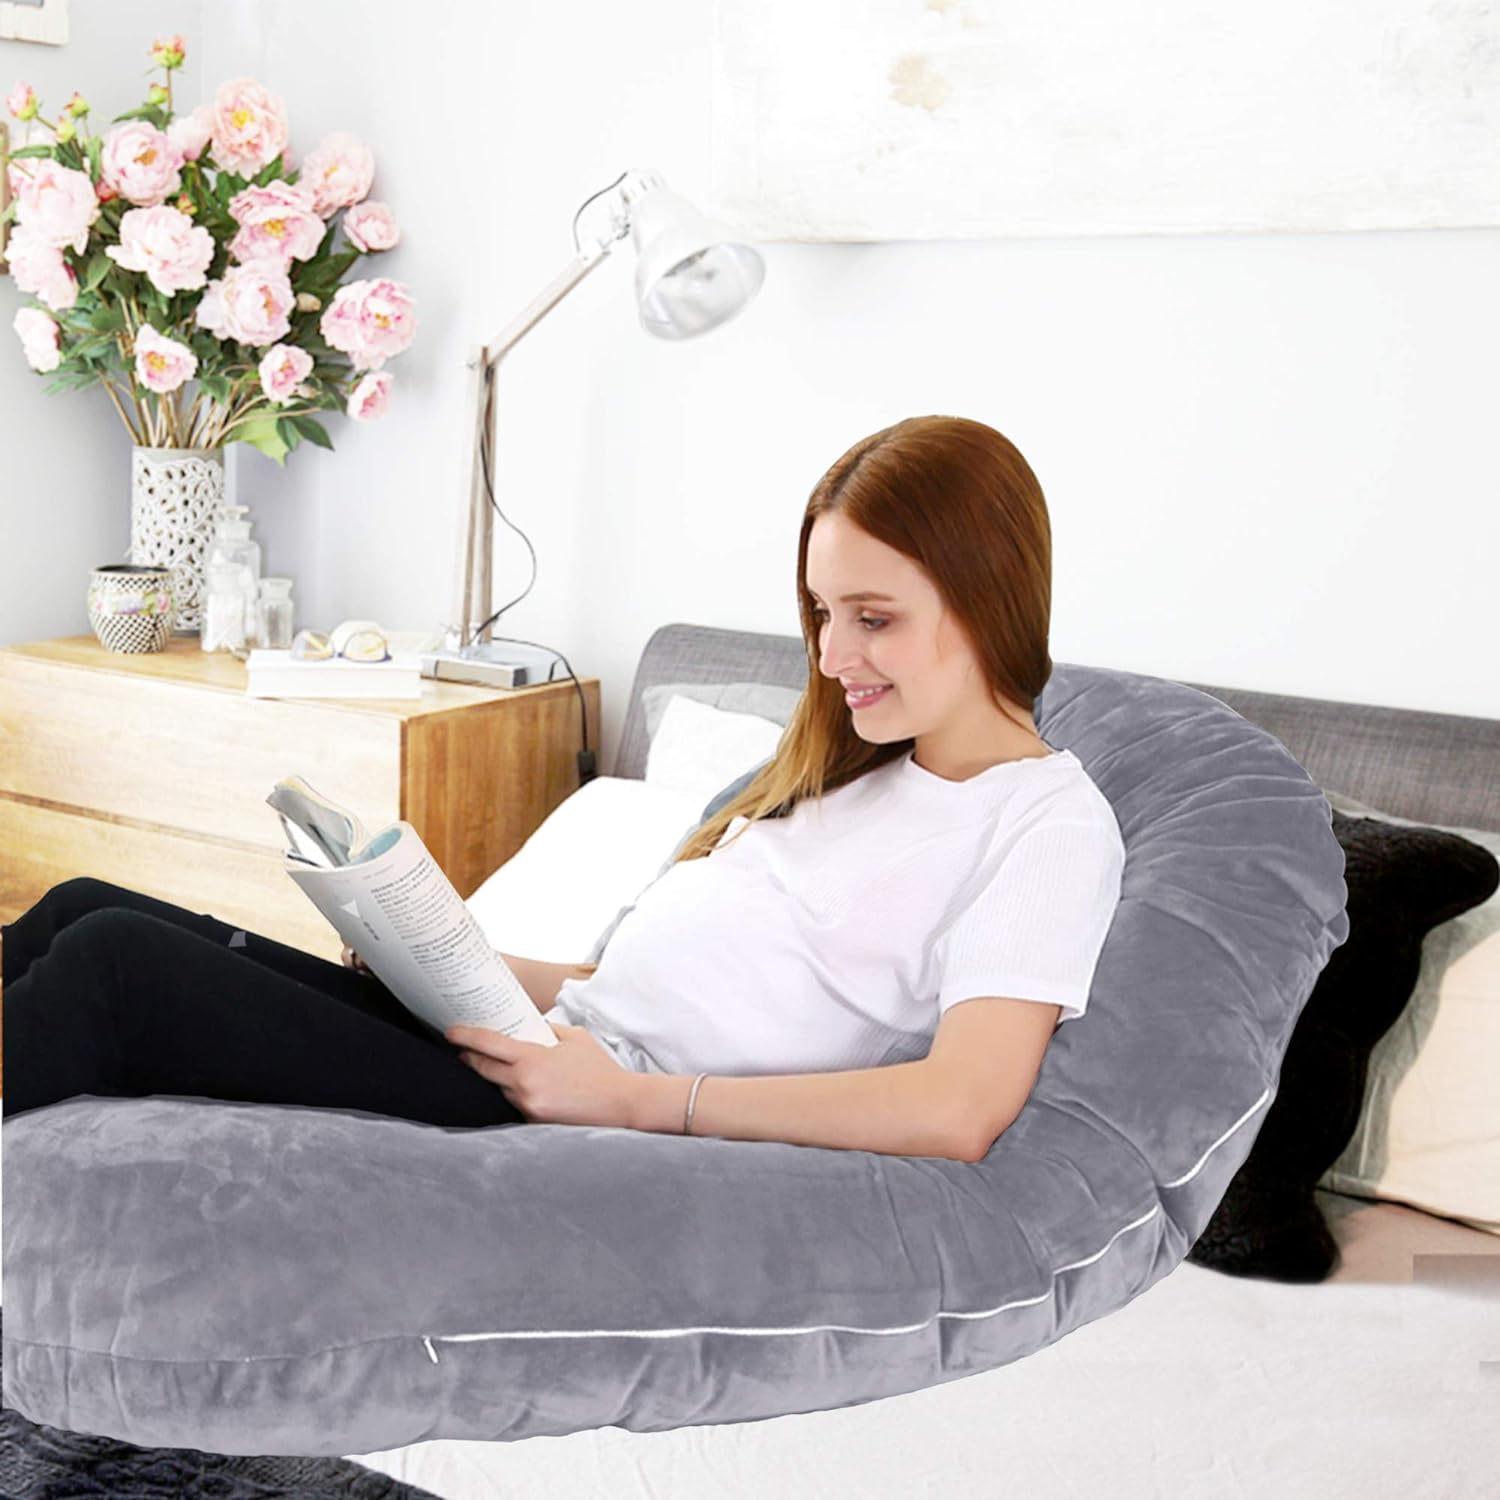 C-Shape Full Body Pillow 53 Inch Maternity Pillow with Washable Velvet Cover Nursing Support Cushion, Support for Back